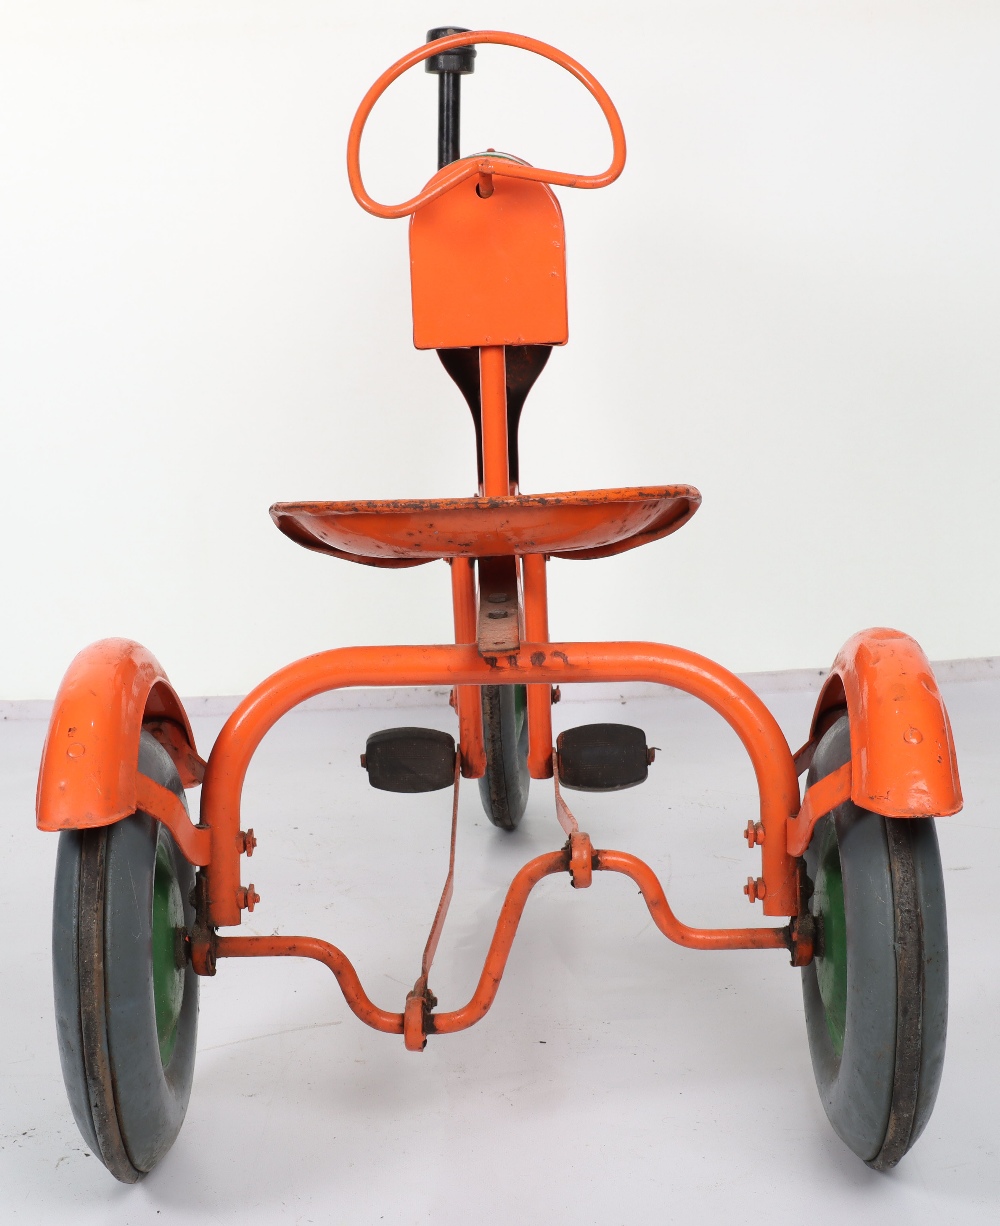 A Tri-ang pressed steel child’s pedal Tractor Major, English 1960s - Image 9 of 9